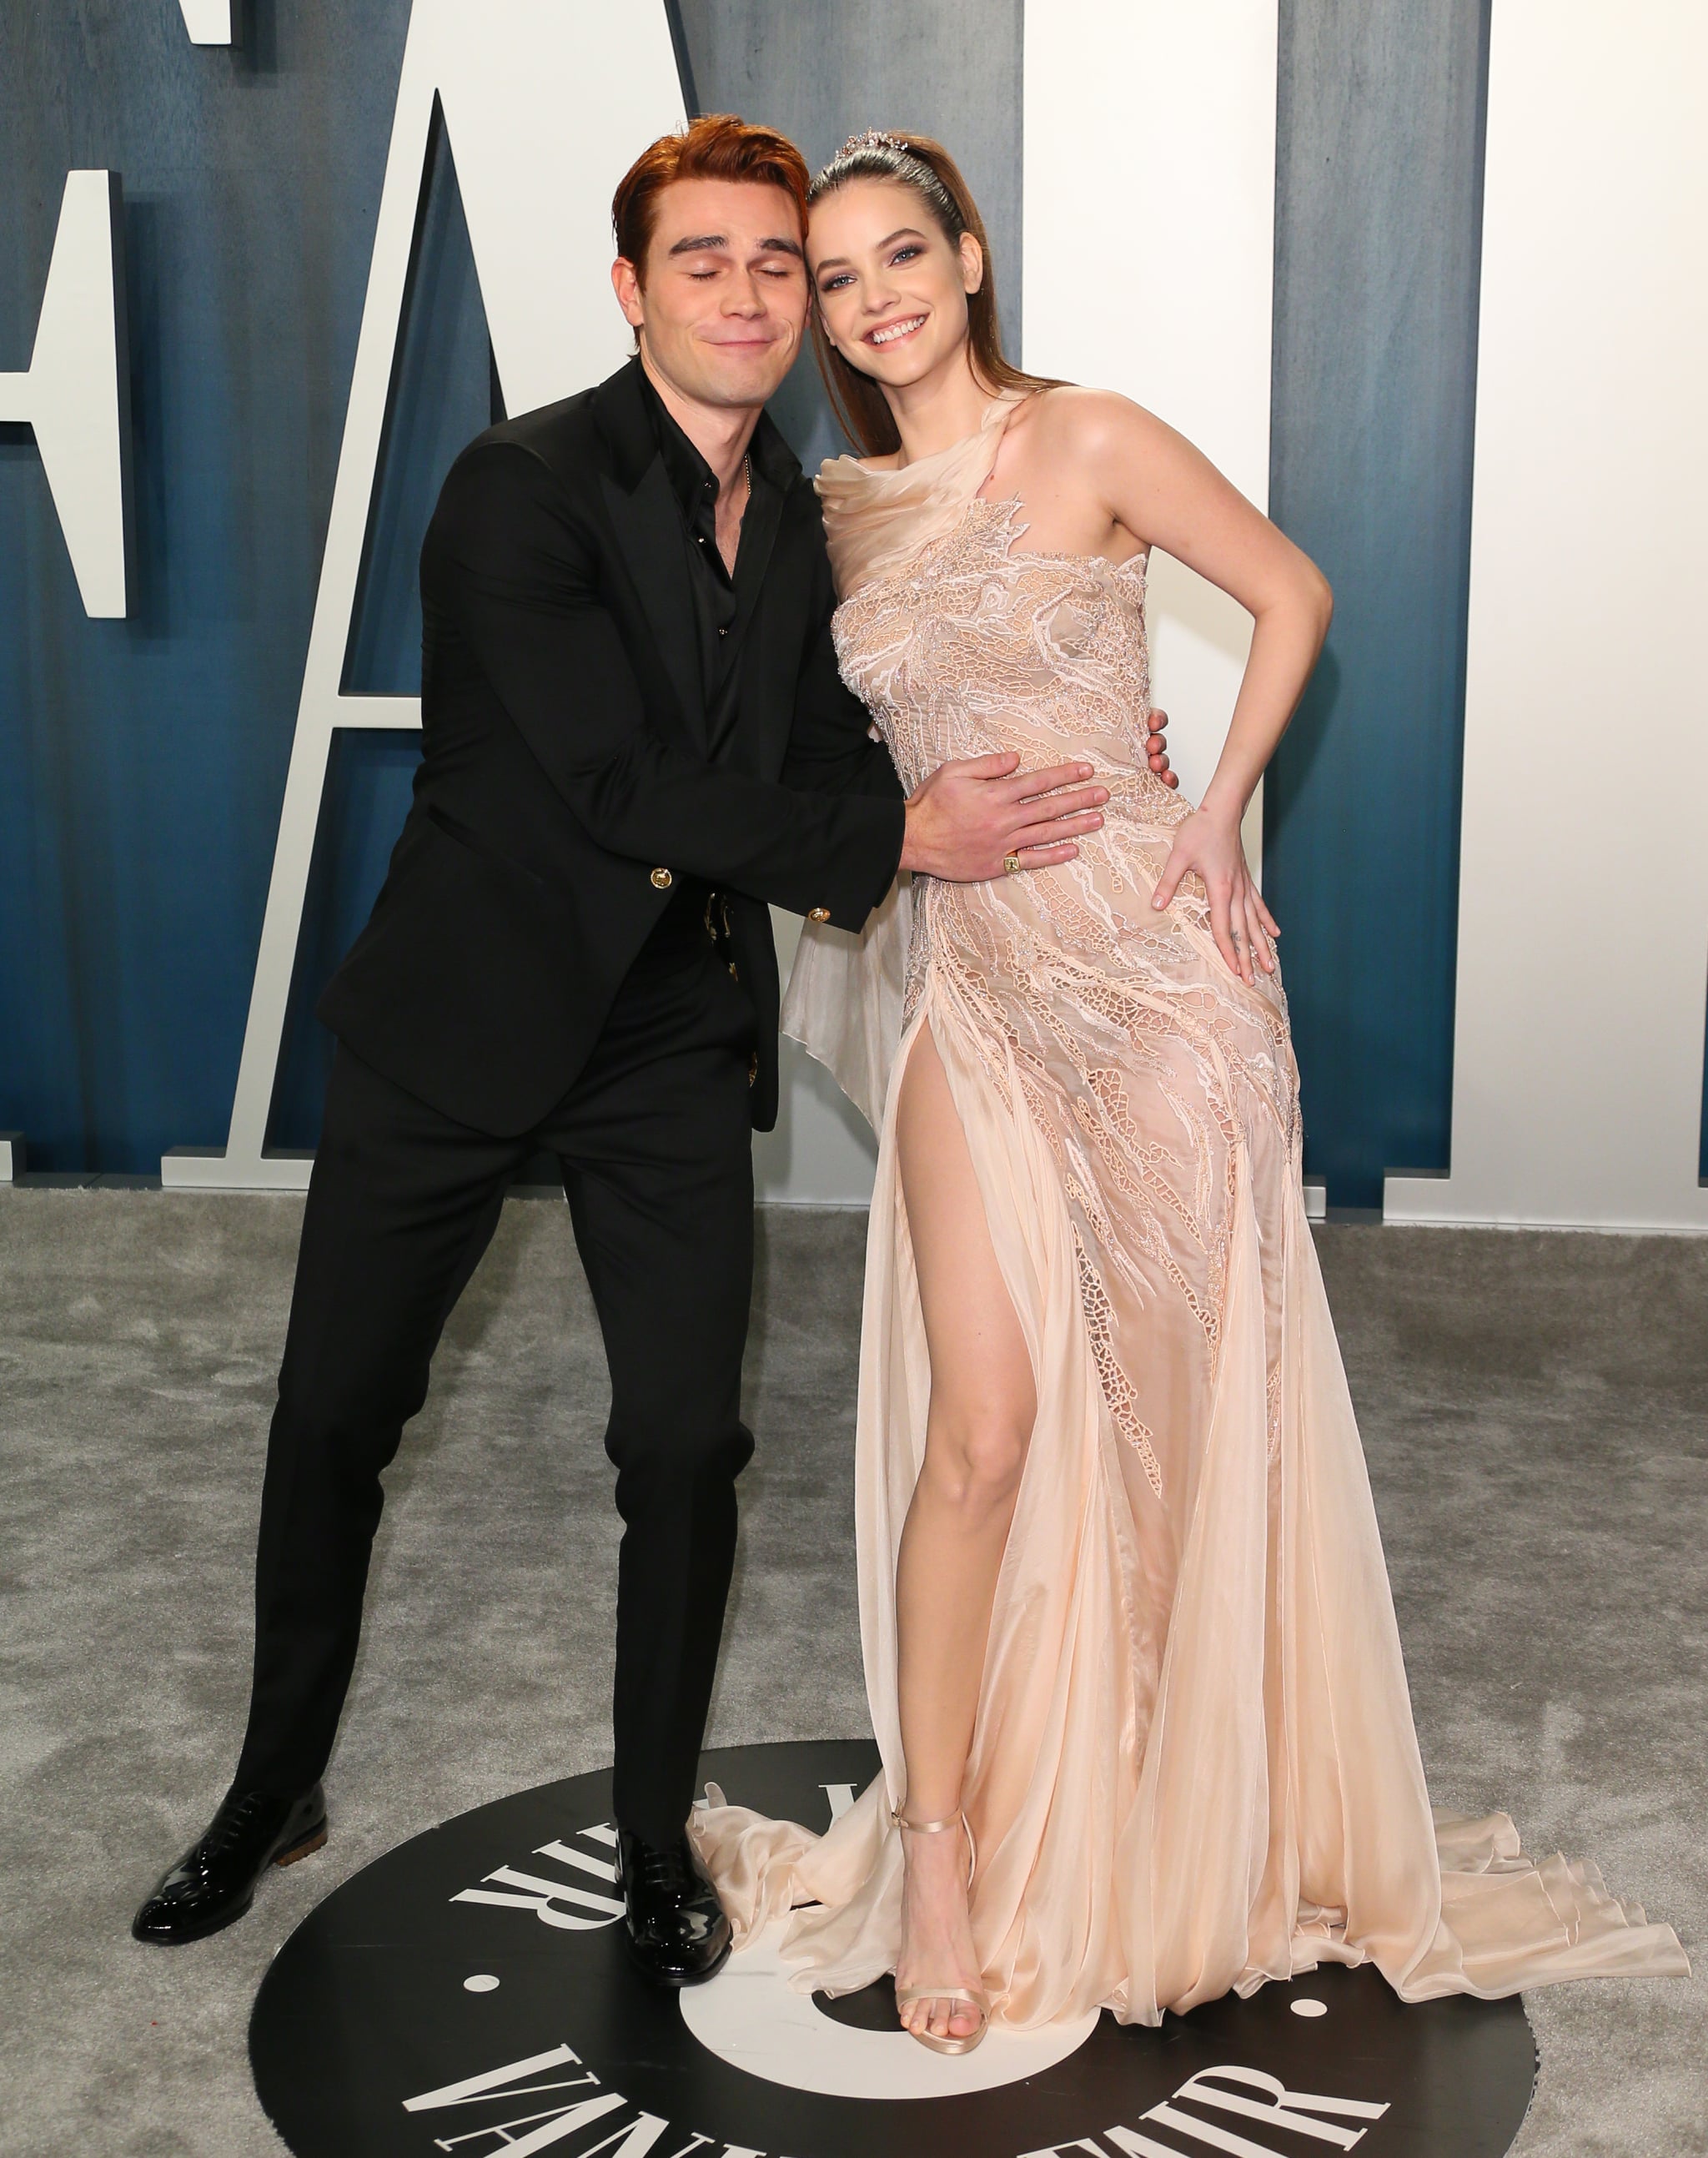 New Zealand actor KJ Apa and French model Clara Berry attend the 2020 Vanity Fair Oscar Party following the 92nd Oscars at The Wallis Annenberg Centre for the Performing Arts in Beverly Hills on February 9, 2020. (Photo by Jean-Baptiste Lacroix / AFP) (Photo by JEAN-BAPTISTE LACROIX/AFP via Getty Images)